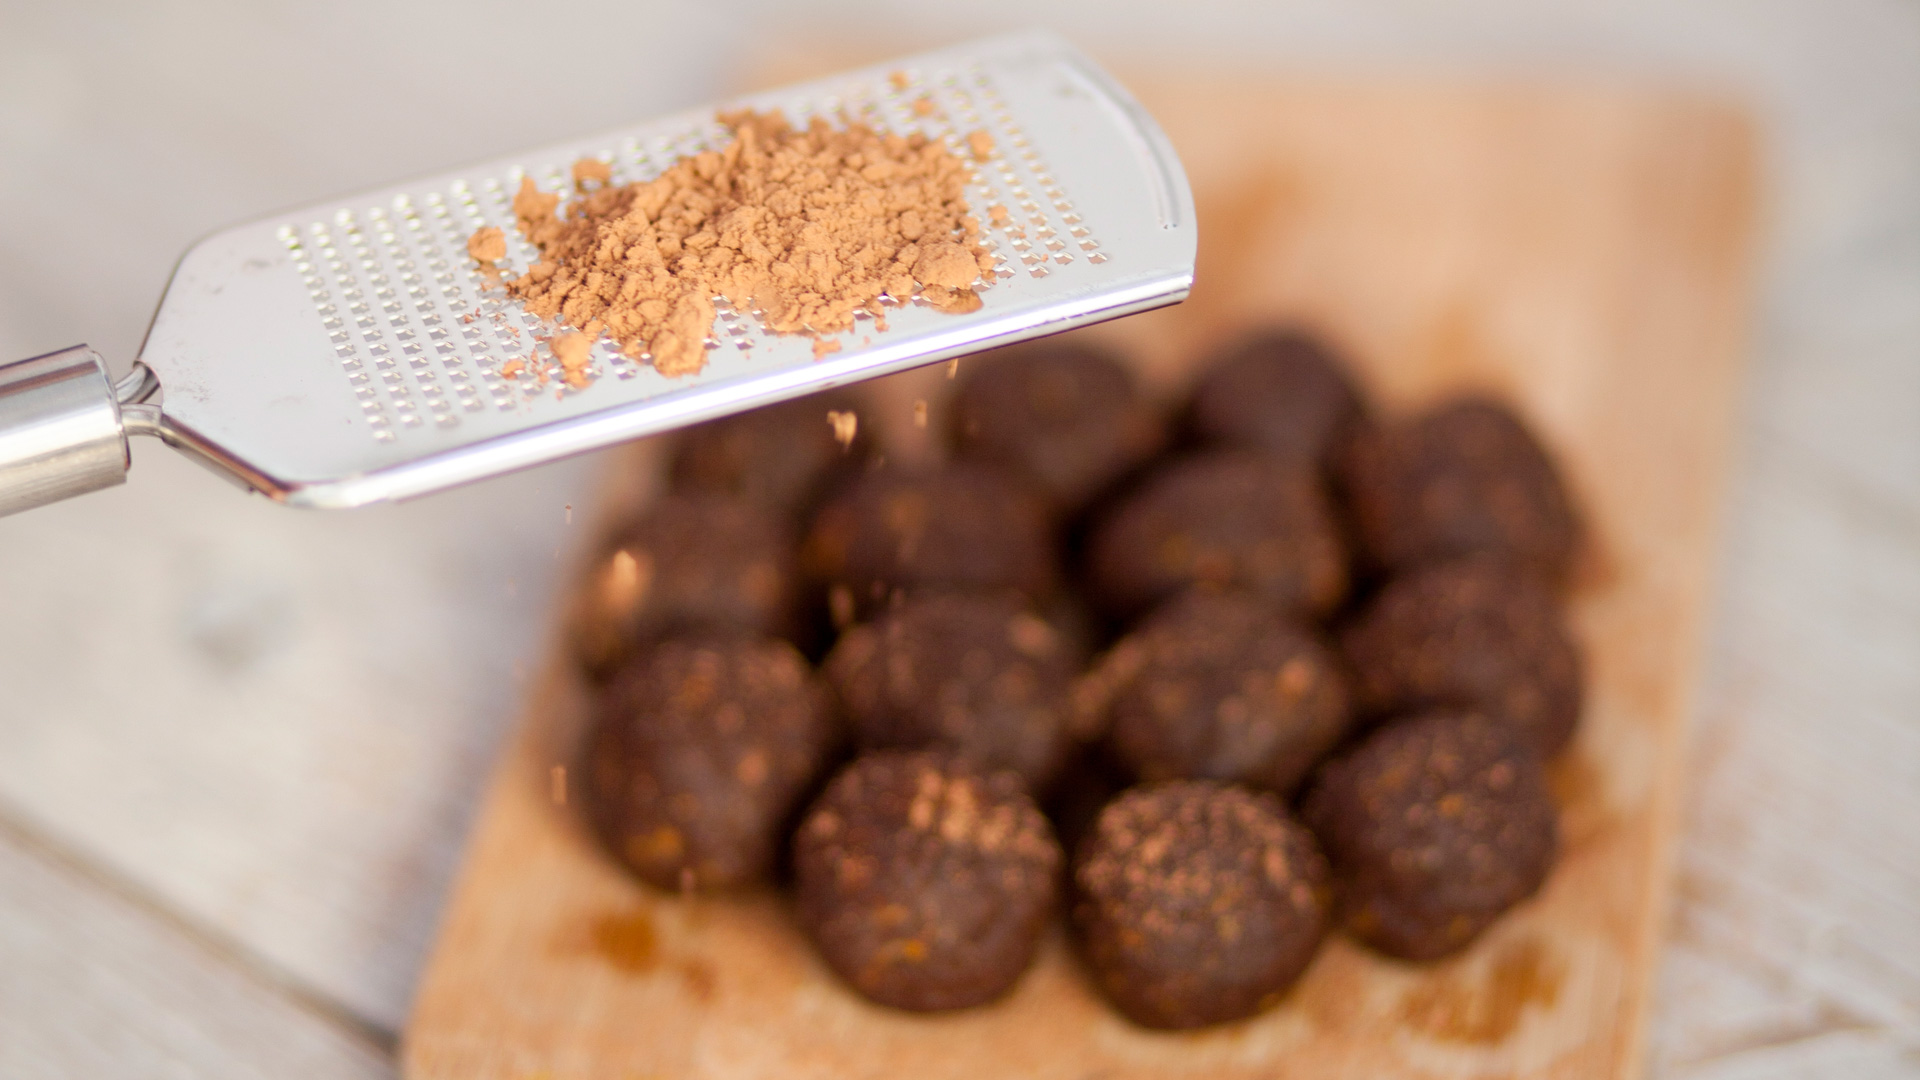 Linsey Boersbroek's delicious and healthy recipe for Superfood Date and Almond Balls with Bee Pollen